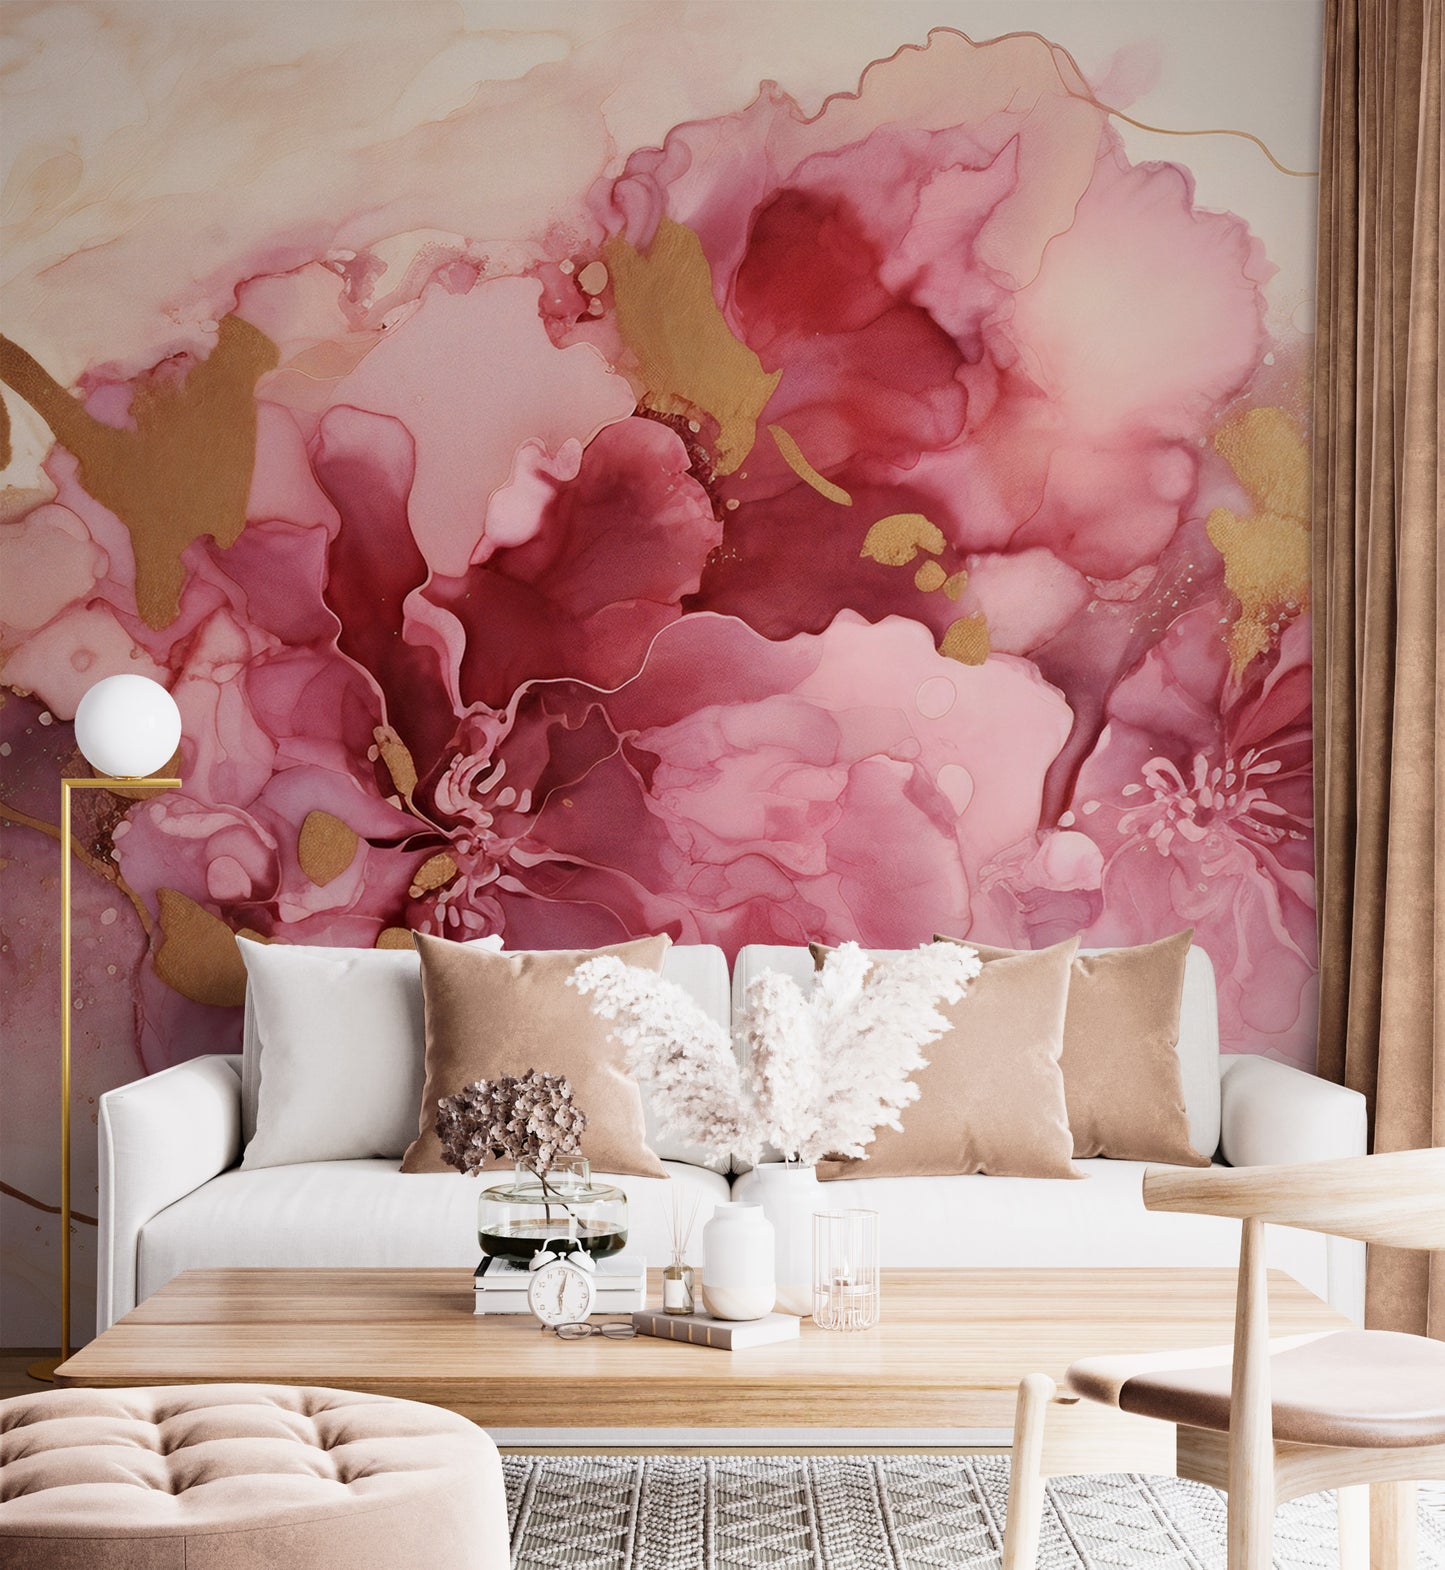 Watercolor Abstract Removable Mural for Artistic Home Decoration